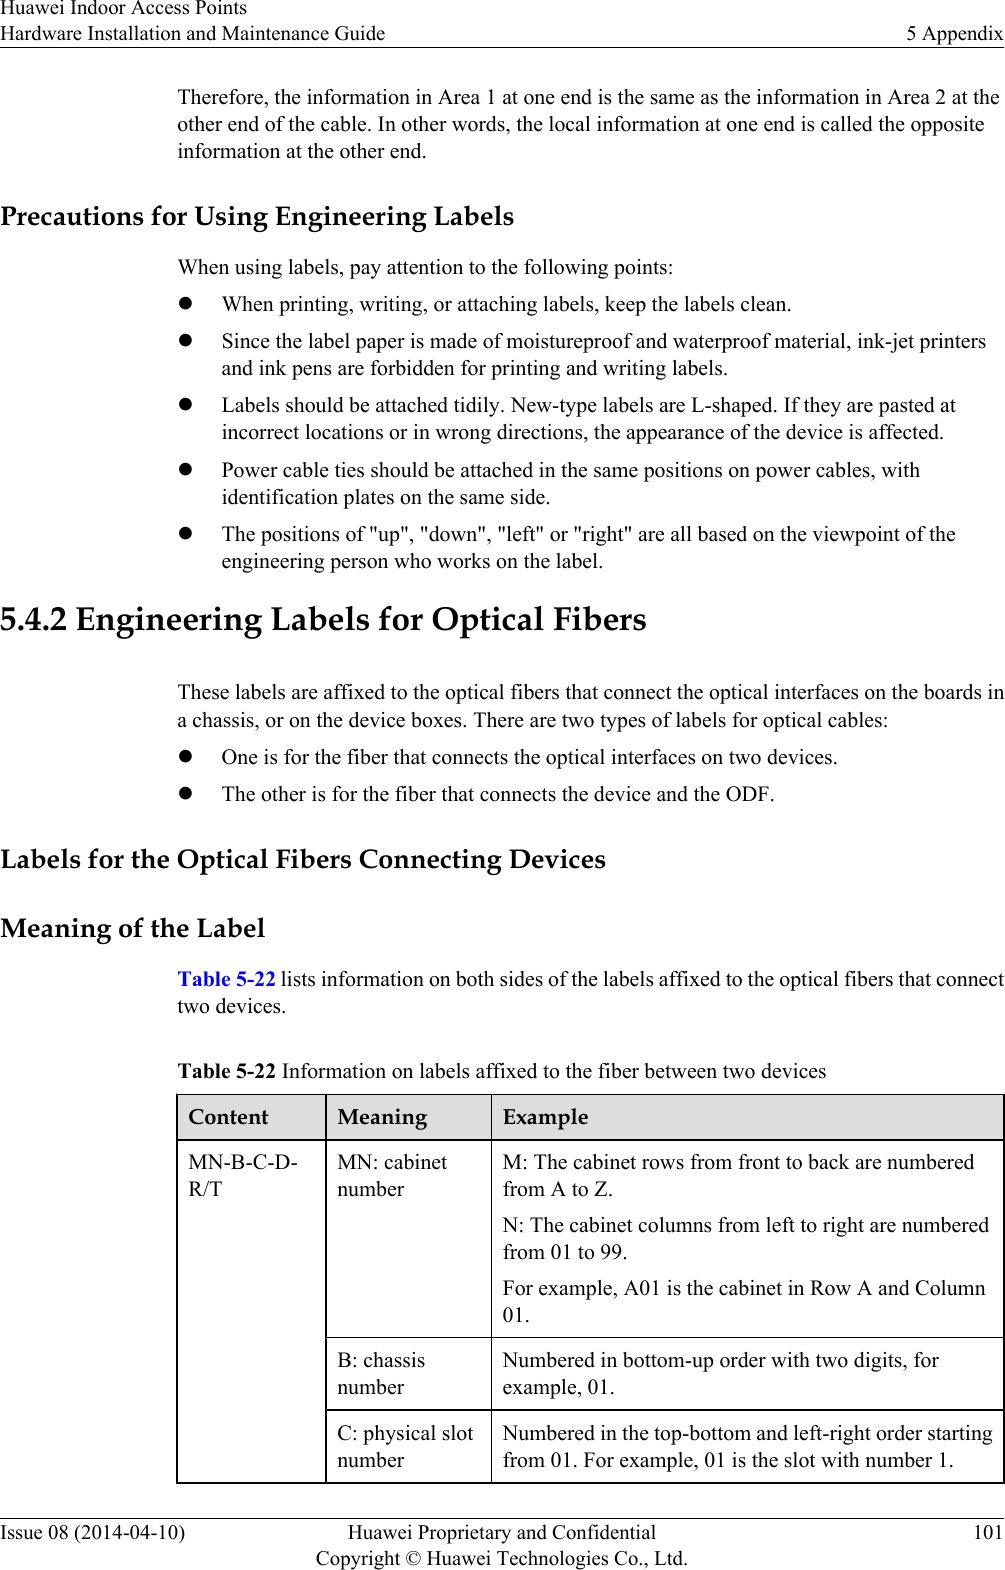 Therefore, the information in Area 1 at one end is the same as the information in Area 2 at theother end of the cable. In other words, the local information at one end is called the oppositeinformation at the other end.Precautions for Using Engineering LabelsWhen using labels, pay attention to the following points:lWhen printing, writing, or attaching labels, keep the labels clean.lSince the label paper is made of moistureproof and waterproof material, ink-jet printersand ink pens are forbidden for printing and writing labels.lLabels should be attached tidily. New-type labels are L-shaped. If they are pasted atincorrect locations or in wrong directions, the appearance of the device is affected.lPower cable ties should be attached in the same positions on power cables, withidentification plates on the same side.lThe positions of &quot;up&quot;, &quot;down&quot;, &quot;left&quot; or &quot;right&quot; are all based on the viewpoint of theengineering person who works on the label.5.4.2 Engineering Labels for Optical FibersThese labels are affixed to the optical fibers that connect the optical interfaces on the boards ina chassis, or on the device boxes. There are two types of labels for optical cables:lOne is for the fiber that connects the optical interfaces on two devices.lThe other is for the fiber that connects the device and the ODF.Labels for the Optical Fibers Connecting DevicesMeaning of the LabelTable 5-22 lists information on both sides of the labels affixed to the optical fibers that connecttwo devices.Table 5-22 Information on labels affixed to the fiber between two devicesContent Meaning ExampleMN-B-C-D-R/TMN: cabinetnumberM: The cabinet rows from front to back are numberedfrom A to Z.N: The cabinet columns from left to right are numberedfrom 01 to 99.For example, A01 is the cabinet in Row A and Column01.B: chassisnumberNumbered in bottom-up order with two digits, forexample, 01.C: physical slotnumberNumbered in the top-bottom and left-right order startingfrom 01. For example, 01 is the slot with number 1.Huawei Indoor Access PointsHardware Installation and Maintenance Guide 5 AppendixIssue 08 (2014-04-10) Huawei Proprietary and ConfidentialCopyright © Huawei Technologies Co., Ltd.101